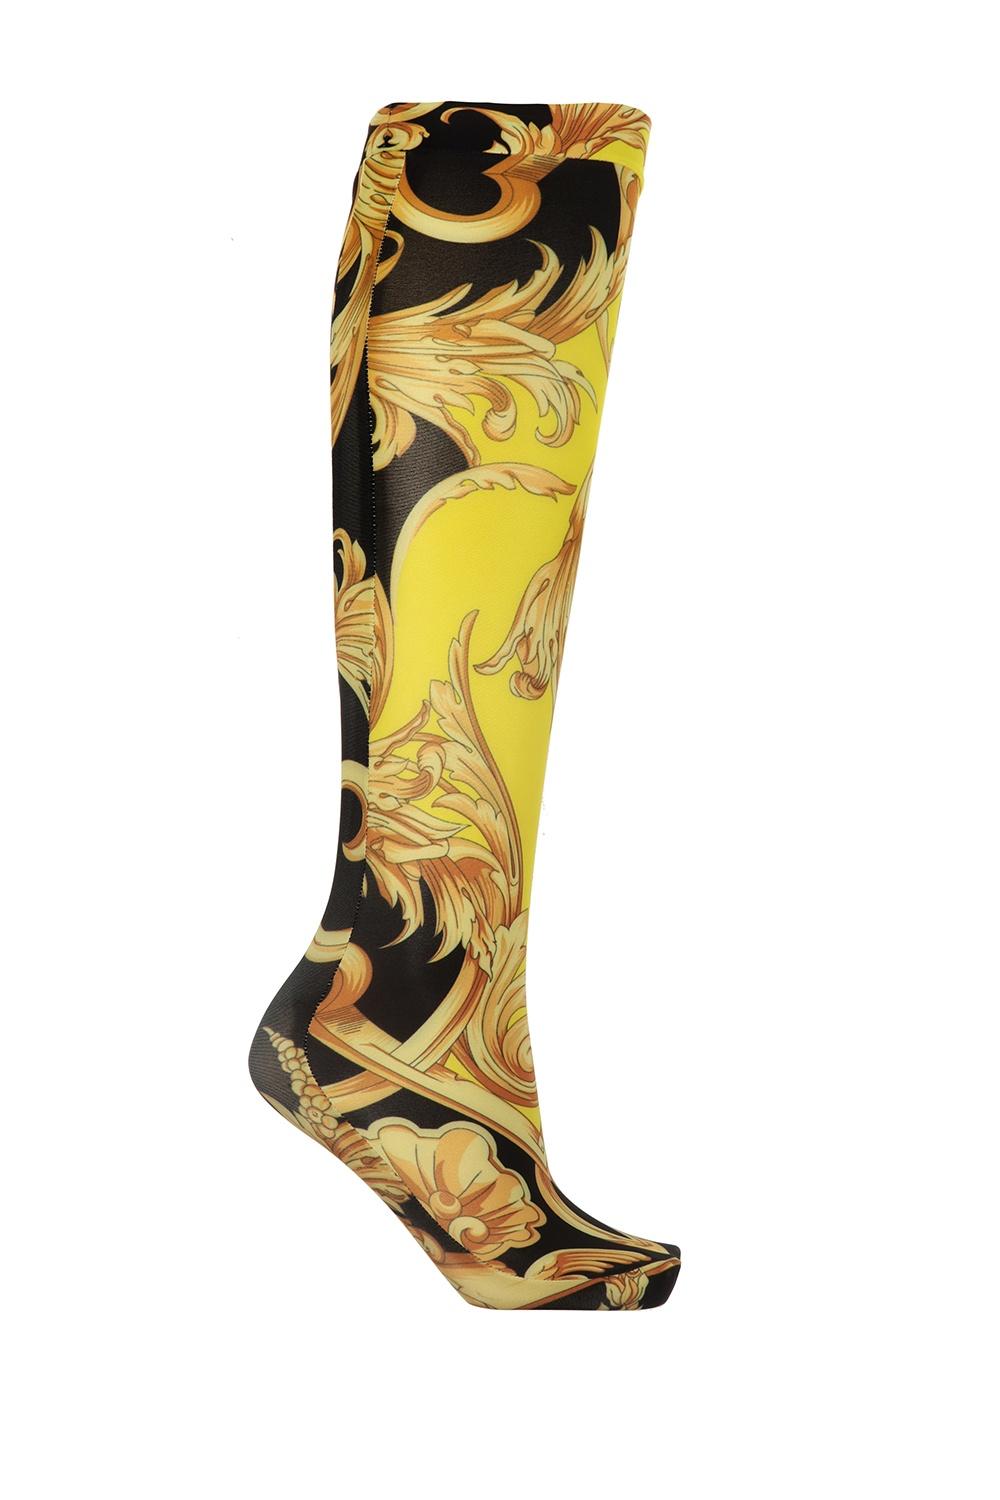 Versace Black and Gold Barocco Femme Print Ladies Socks

These Versace socks are decorated with the opulent Barocco Femme print, which includes black, yellow, and brown. Pair it with Versace heels to make a statement. Brand new. Made in